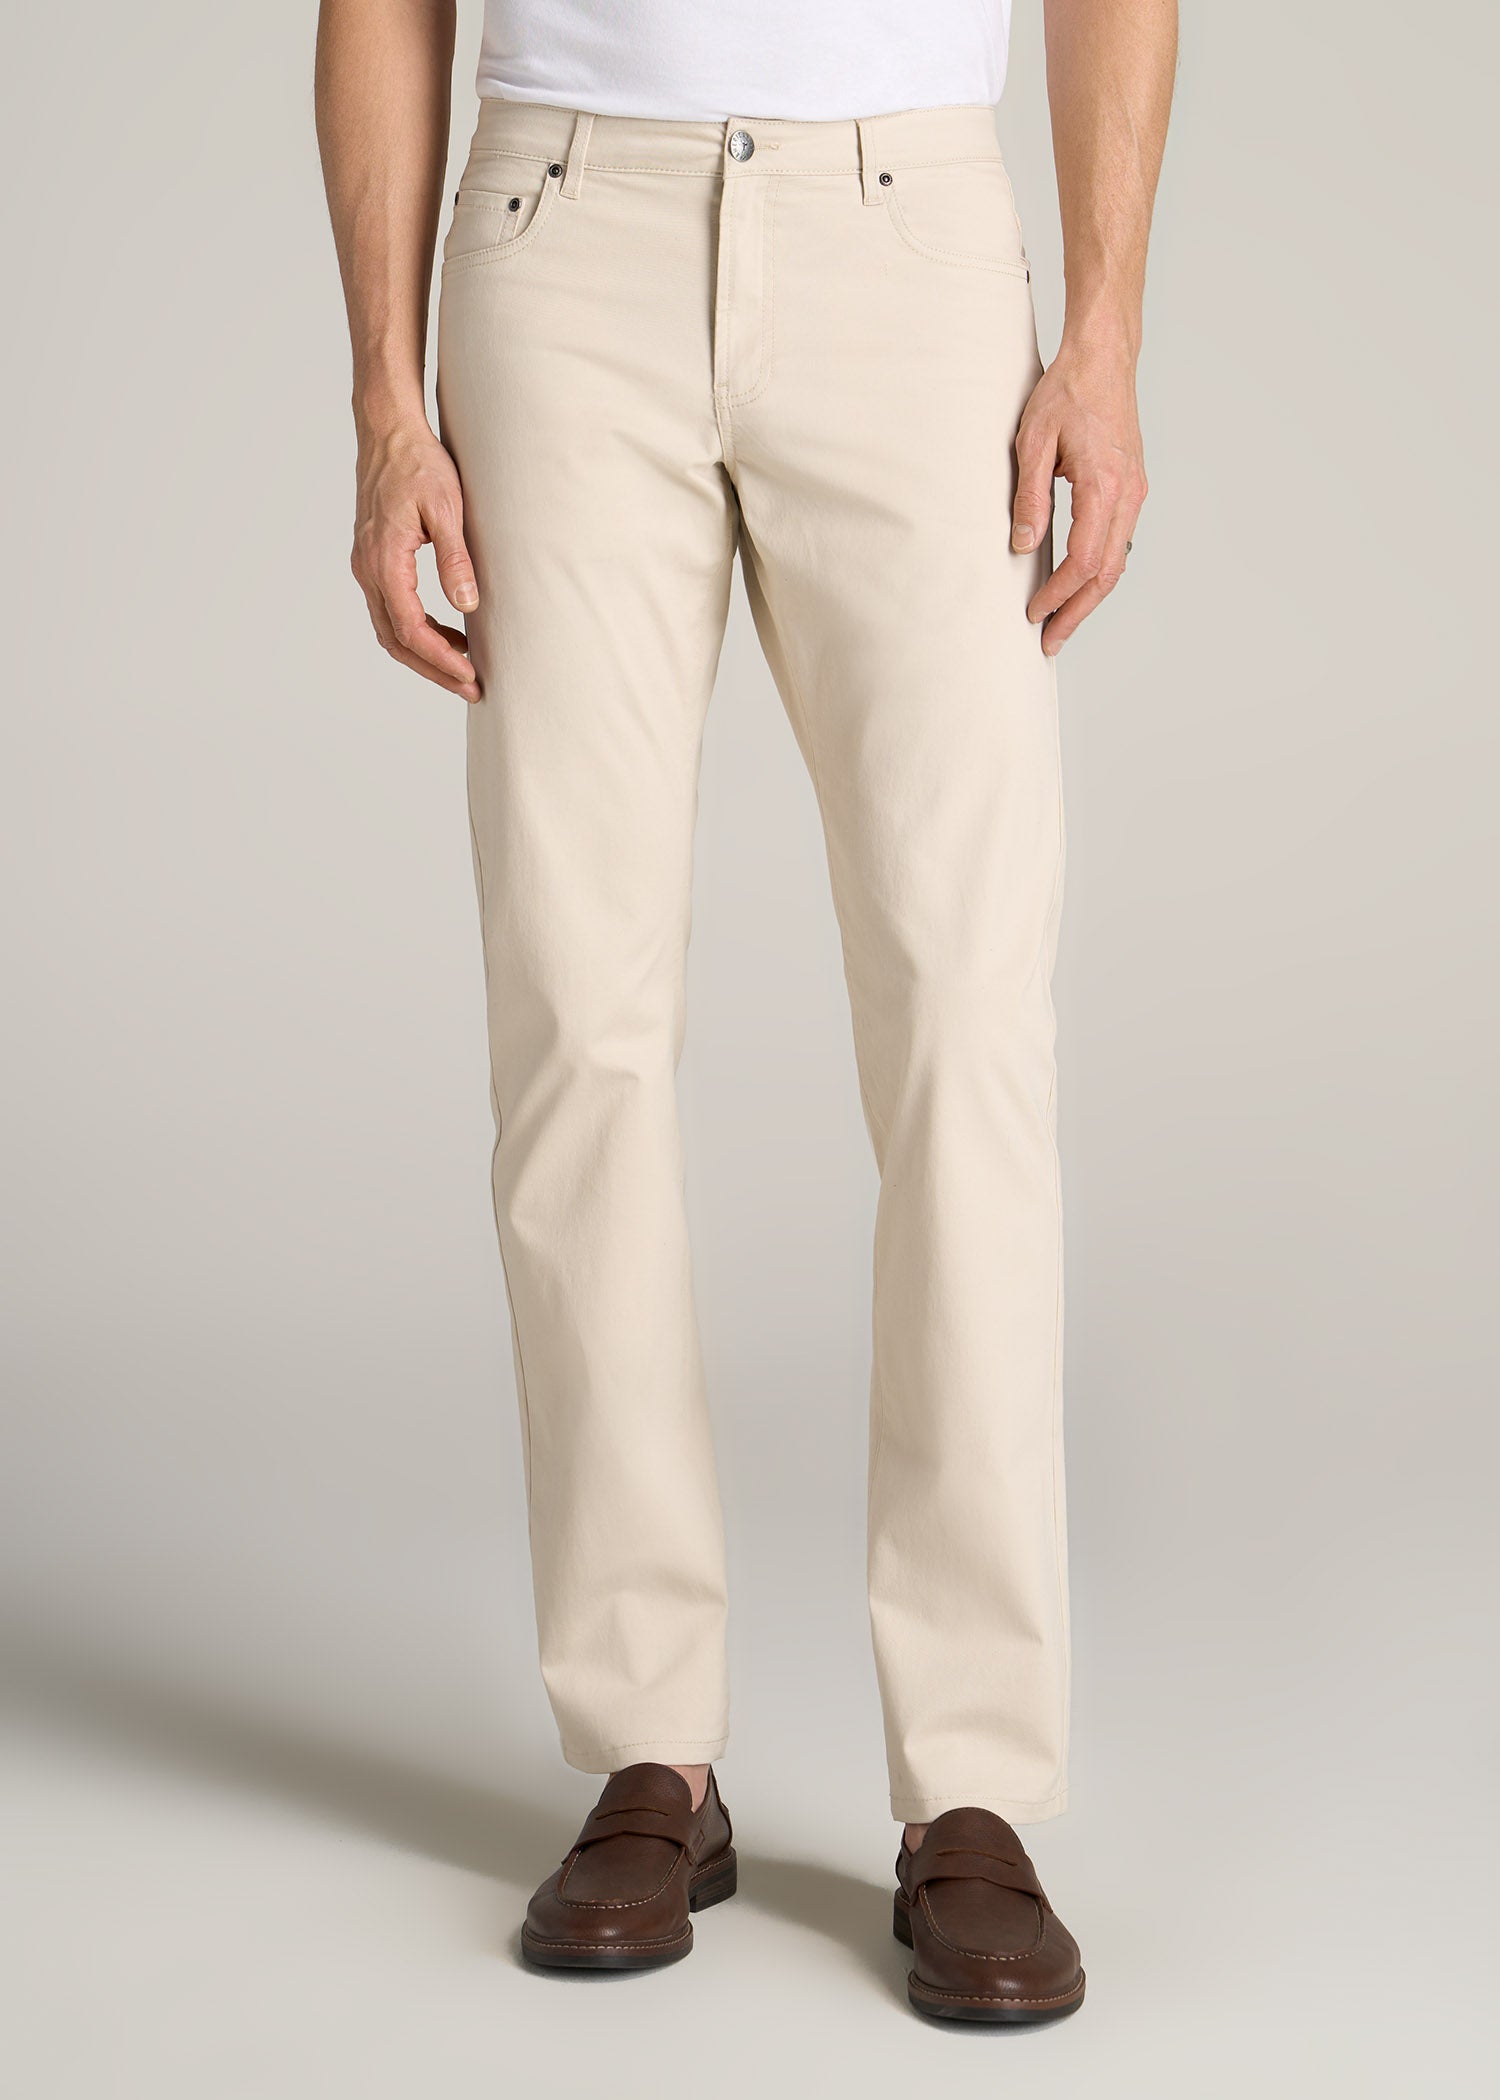 Carman TAPERED Fit Five Pocket Pants for Tall Men in Soft Beige